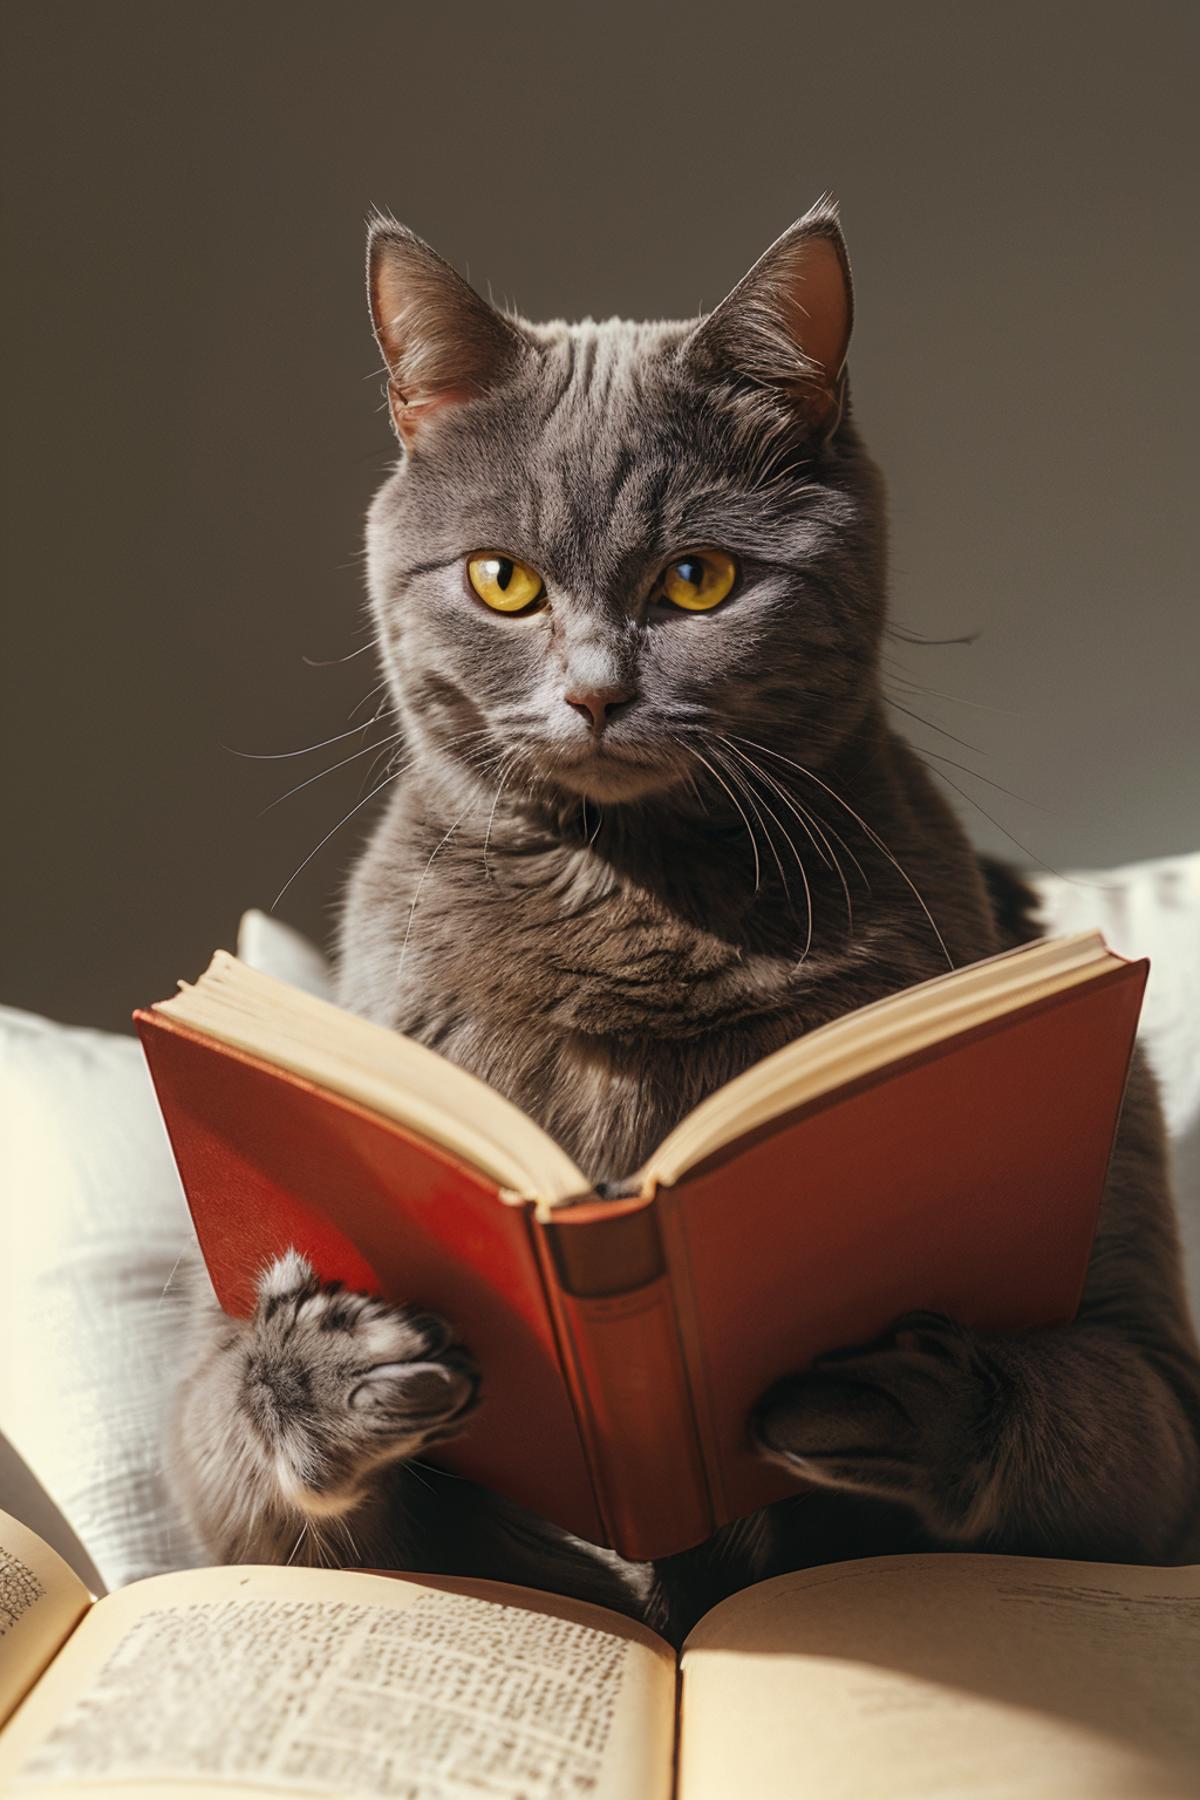 Gray Cat "Reading" a Book with Yellow Eyes